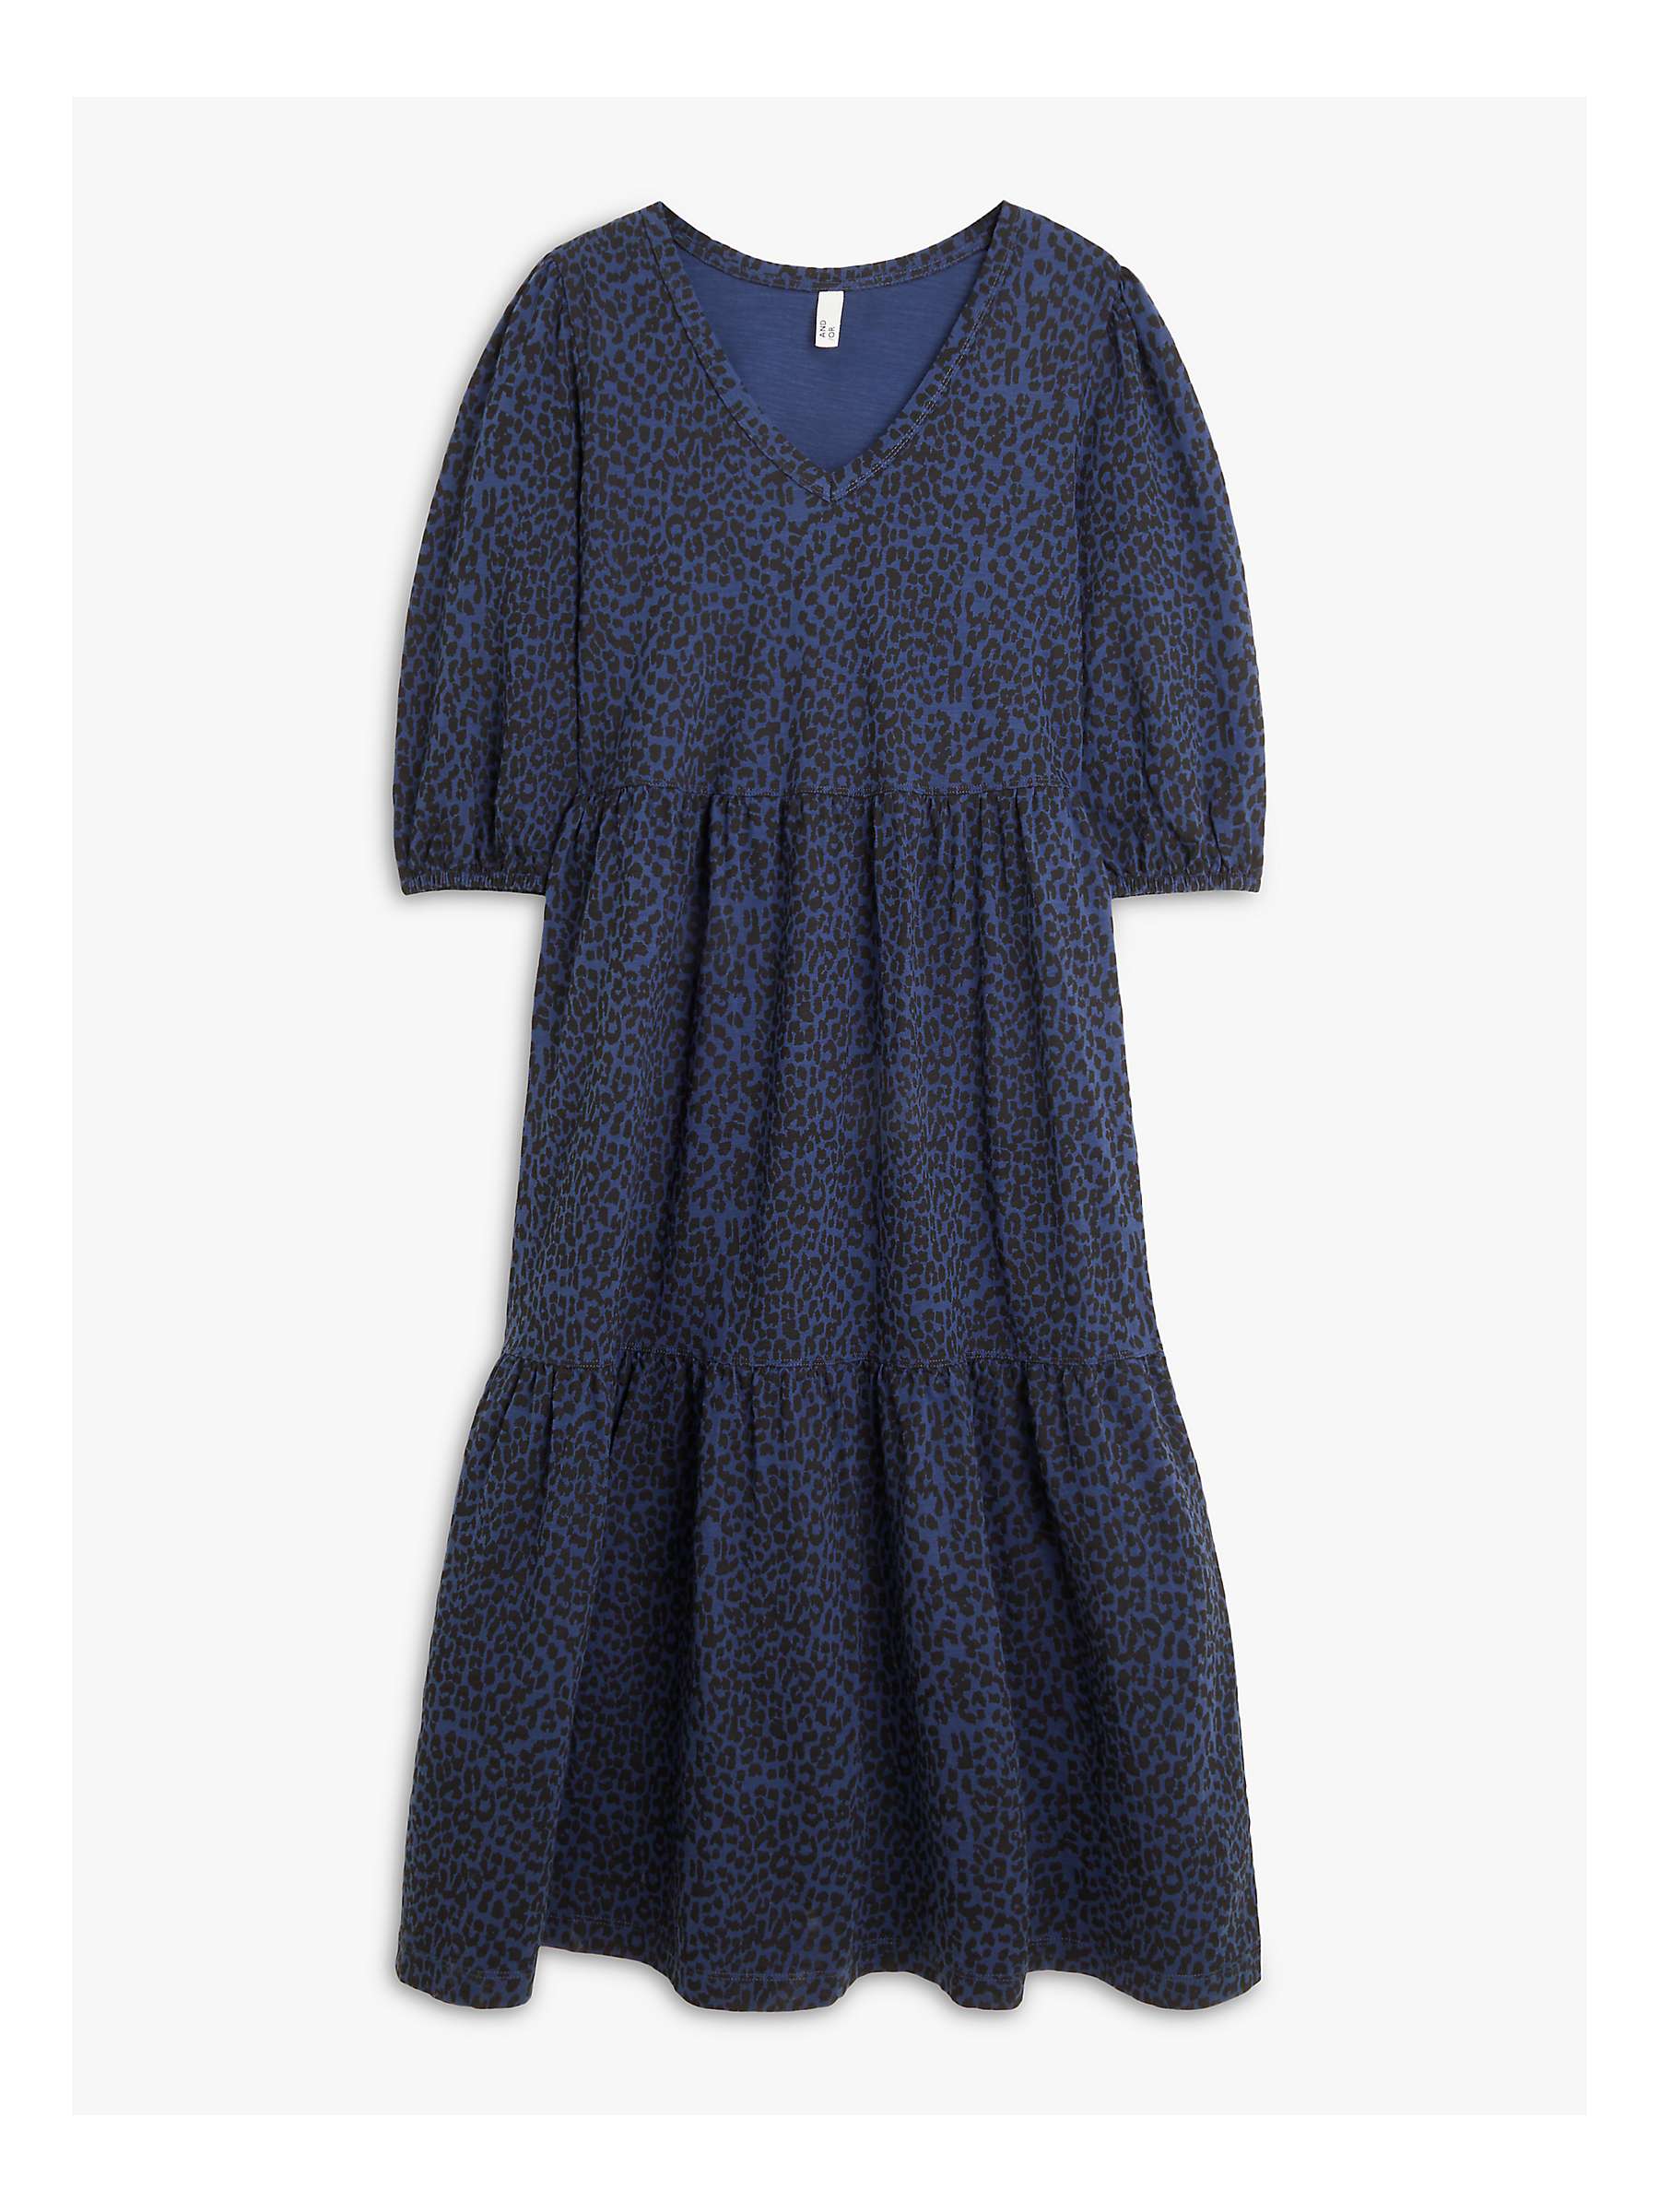 Buy AND/OR Brielle Animal Print Tiered Jersey Dress, Blue Online at johnlewis.com